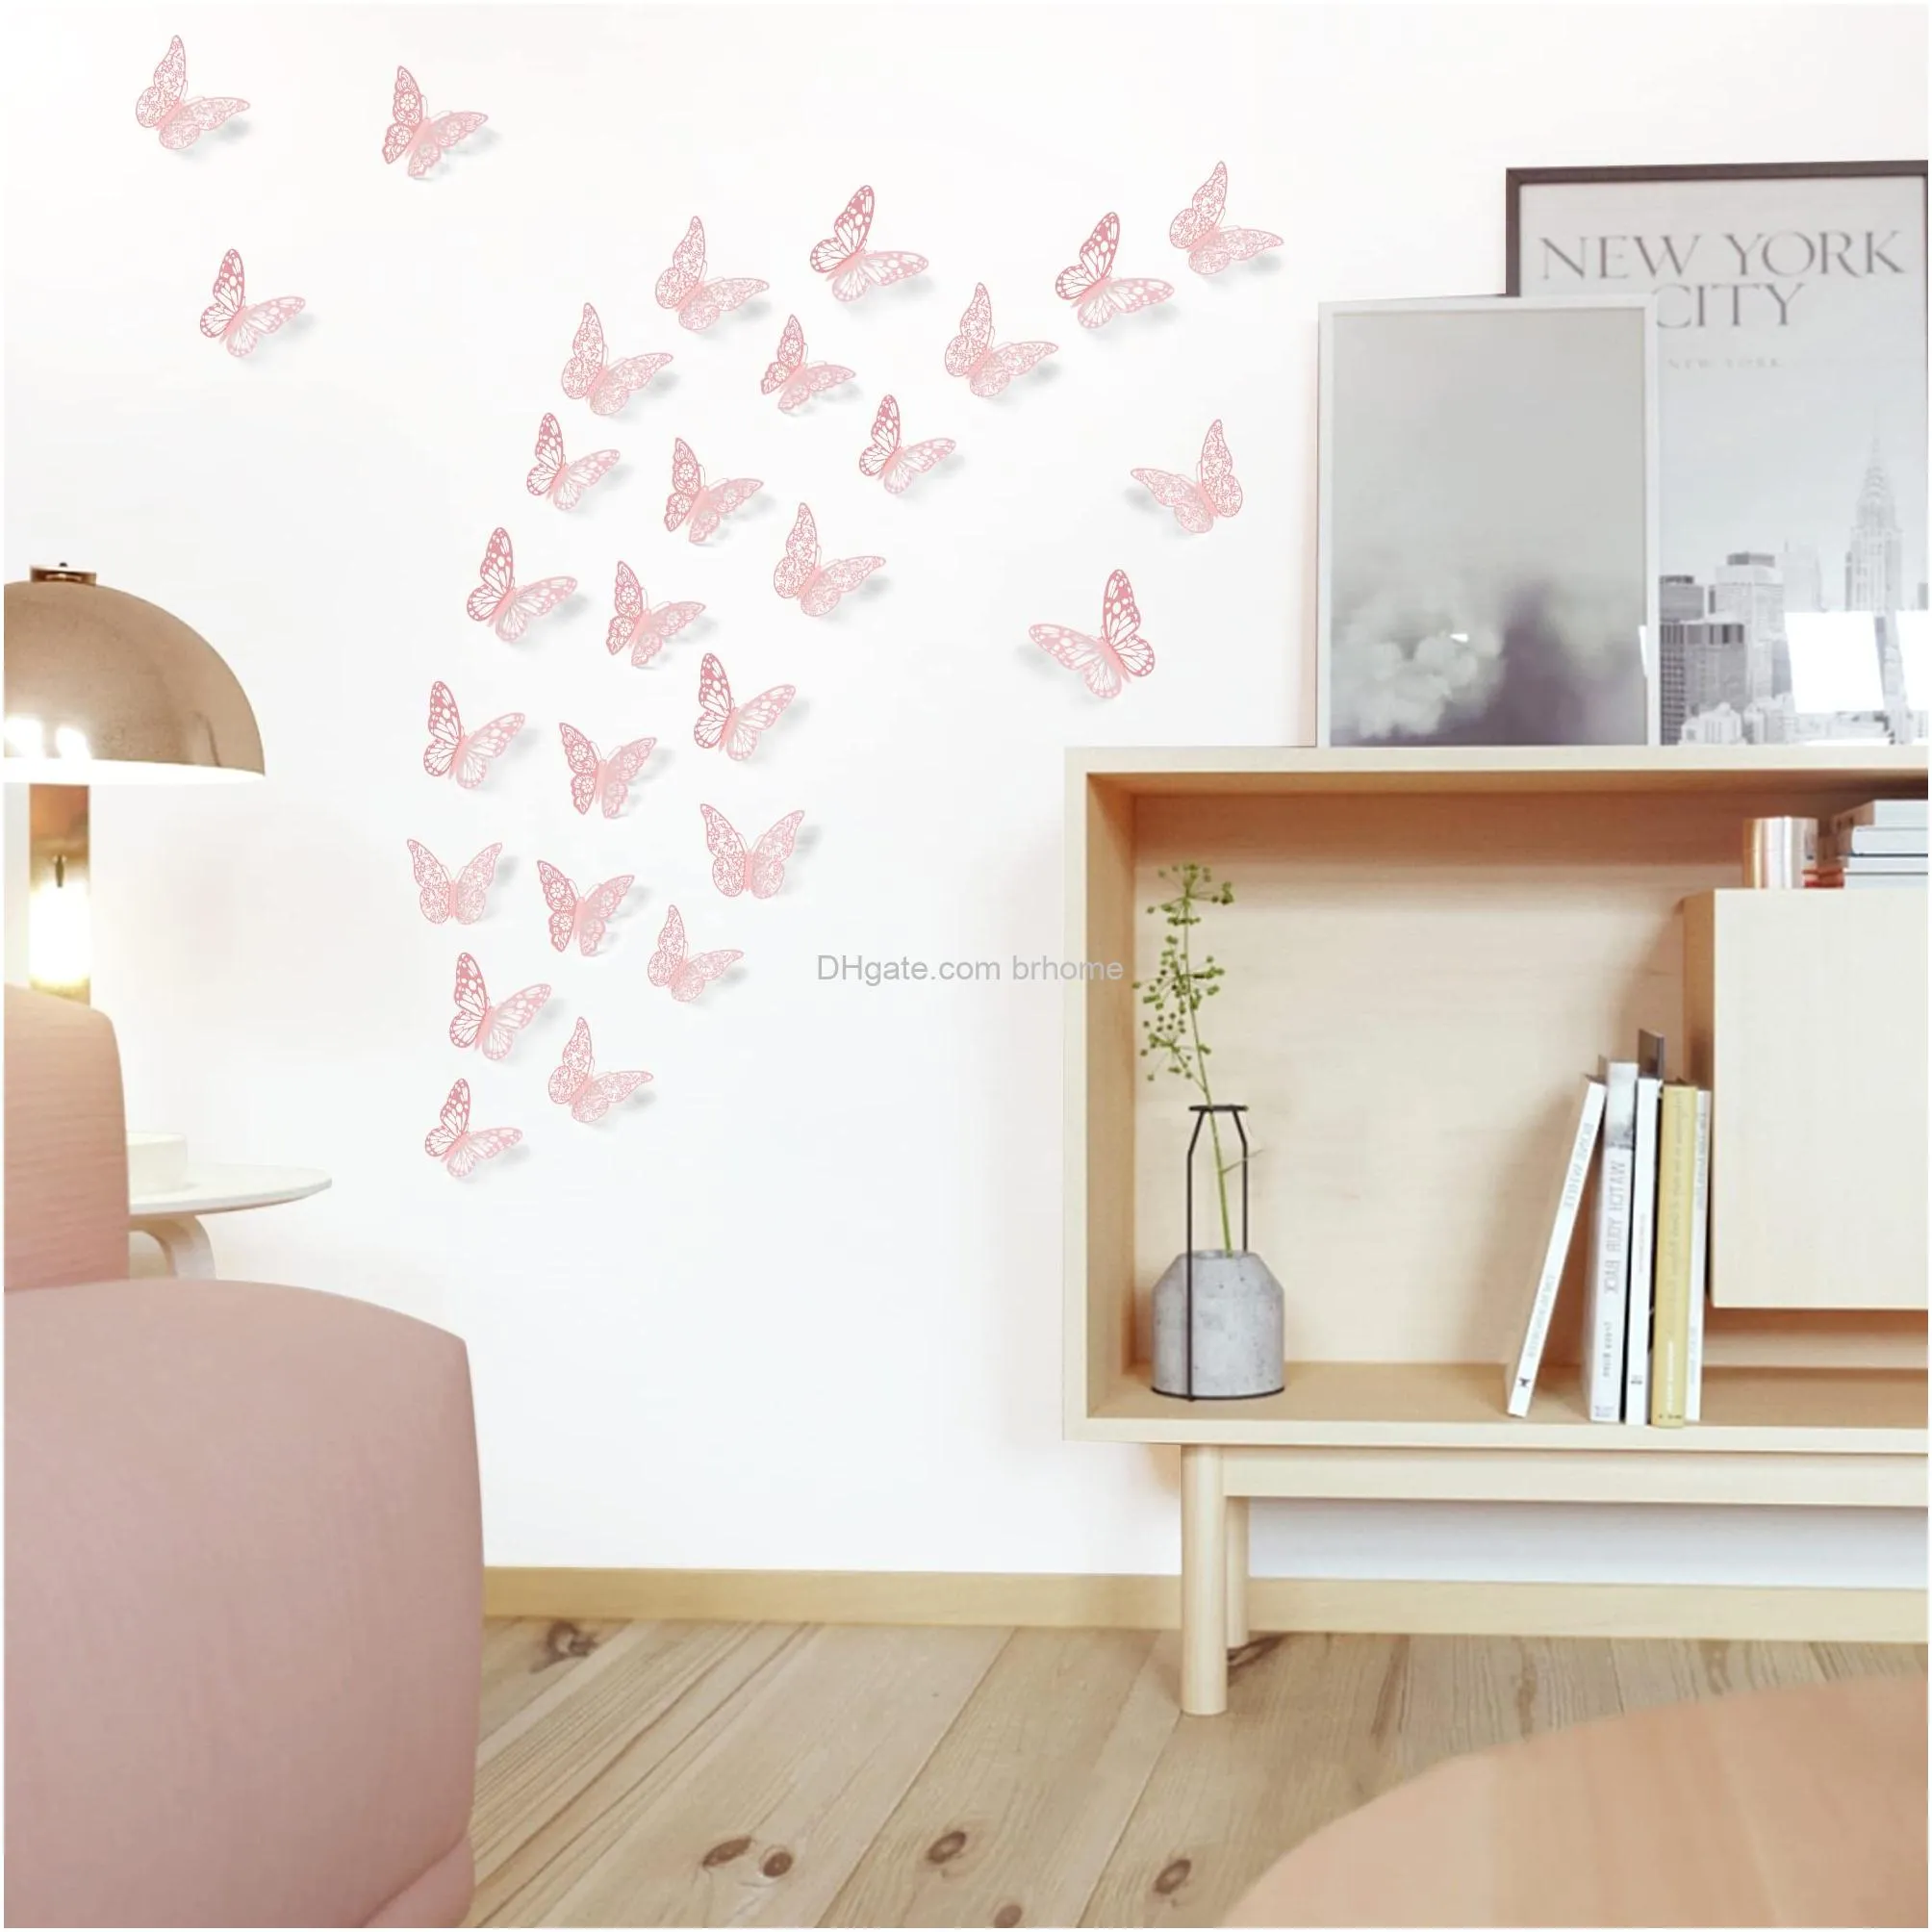 3d butterfly wall decor 3 sizes 3 styles removable stickers wall decor room mural for party cake decoration metallic fridge sticker kids bedroom nursery classroom wedding decor diy gift pink